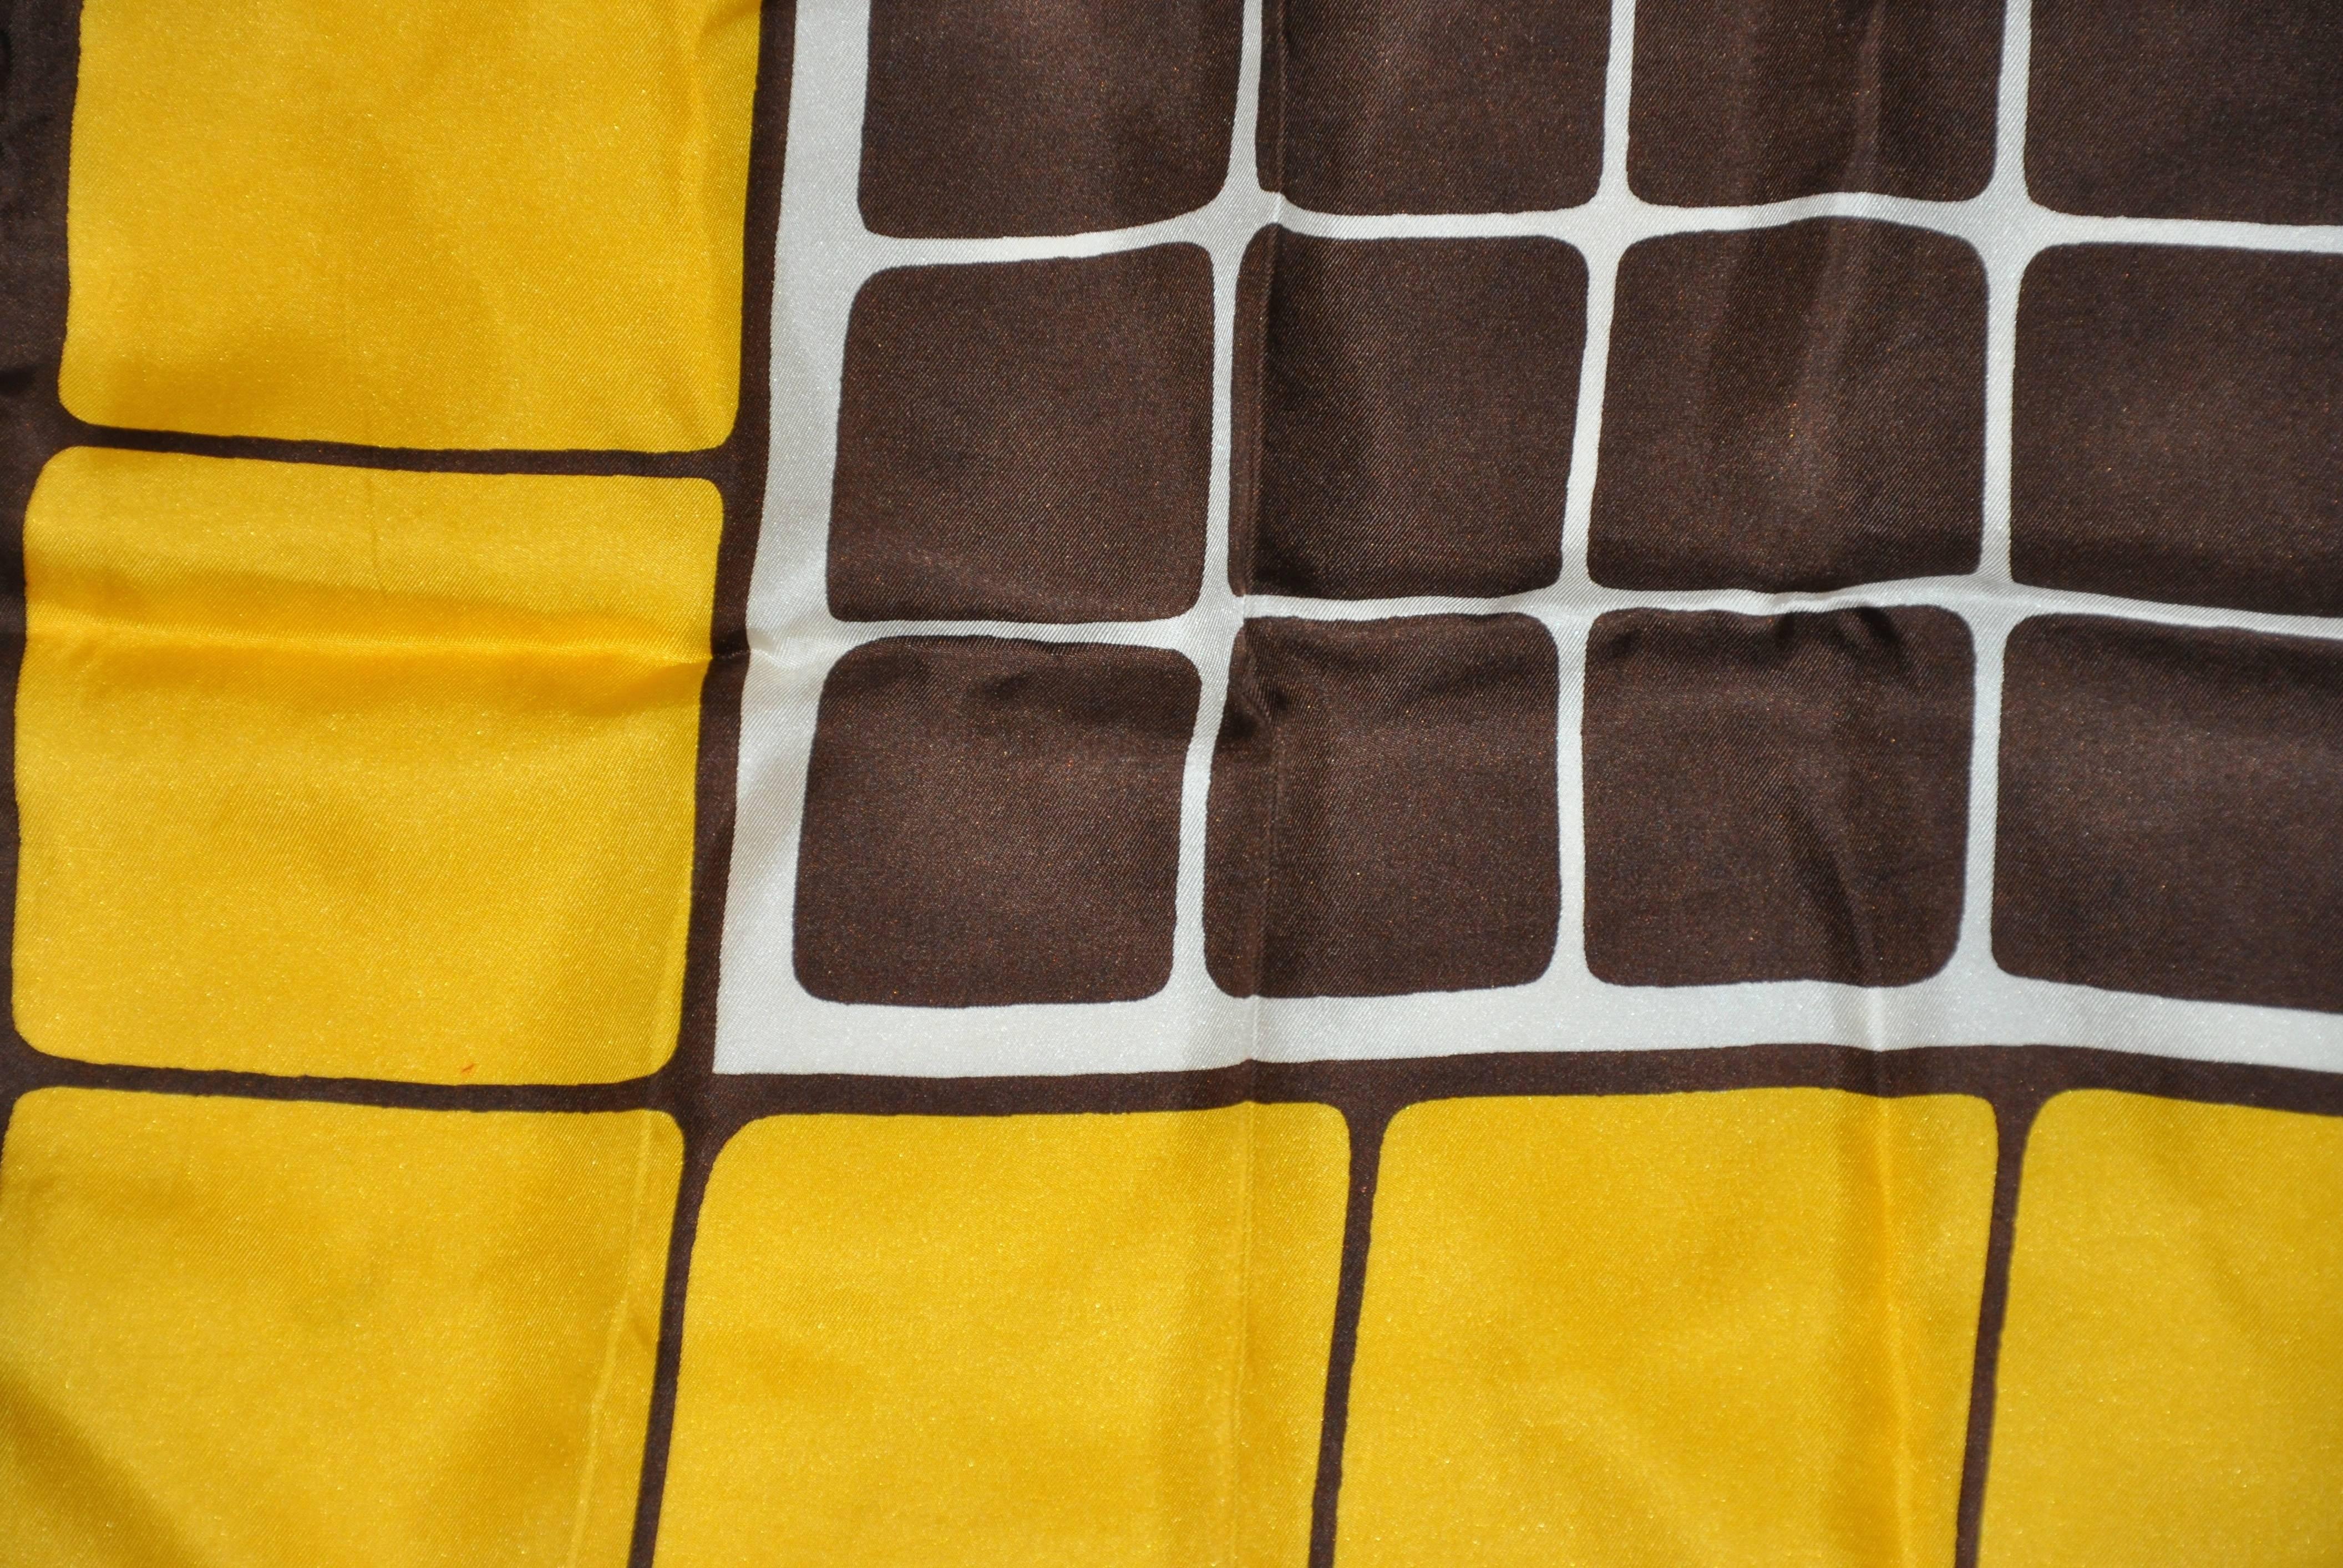 Symphony "yellow & brown color-block" silk scarf measures 26" x 26" and finished with hand-rolled edges. Made in Italy.